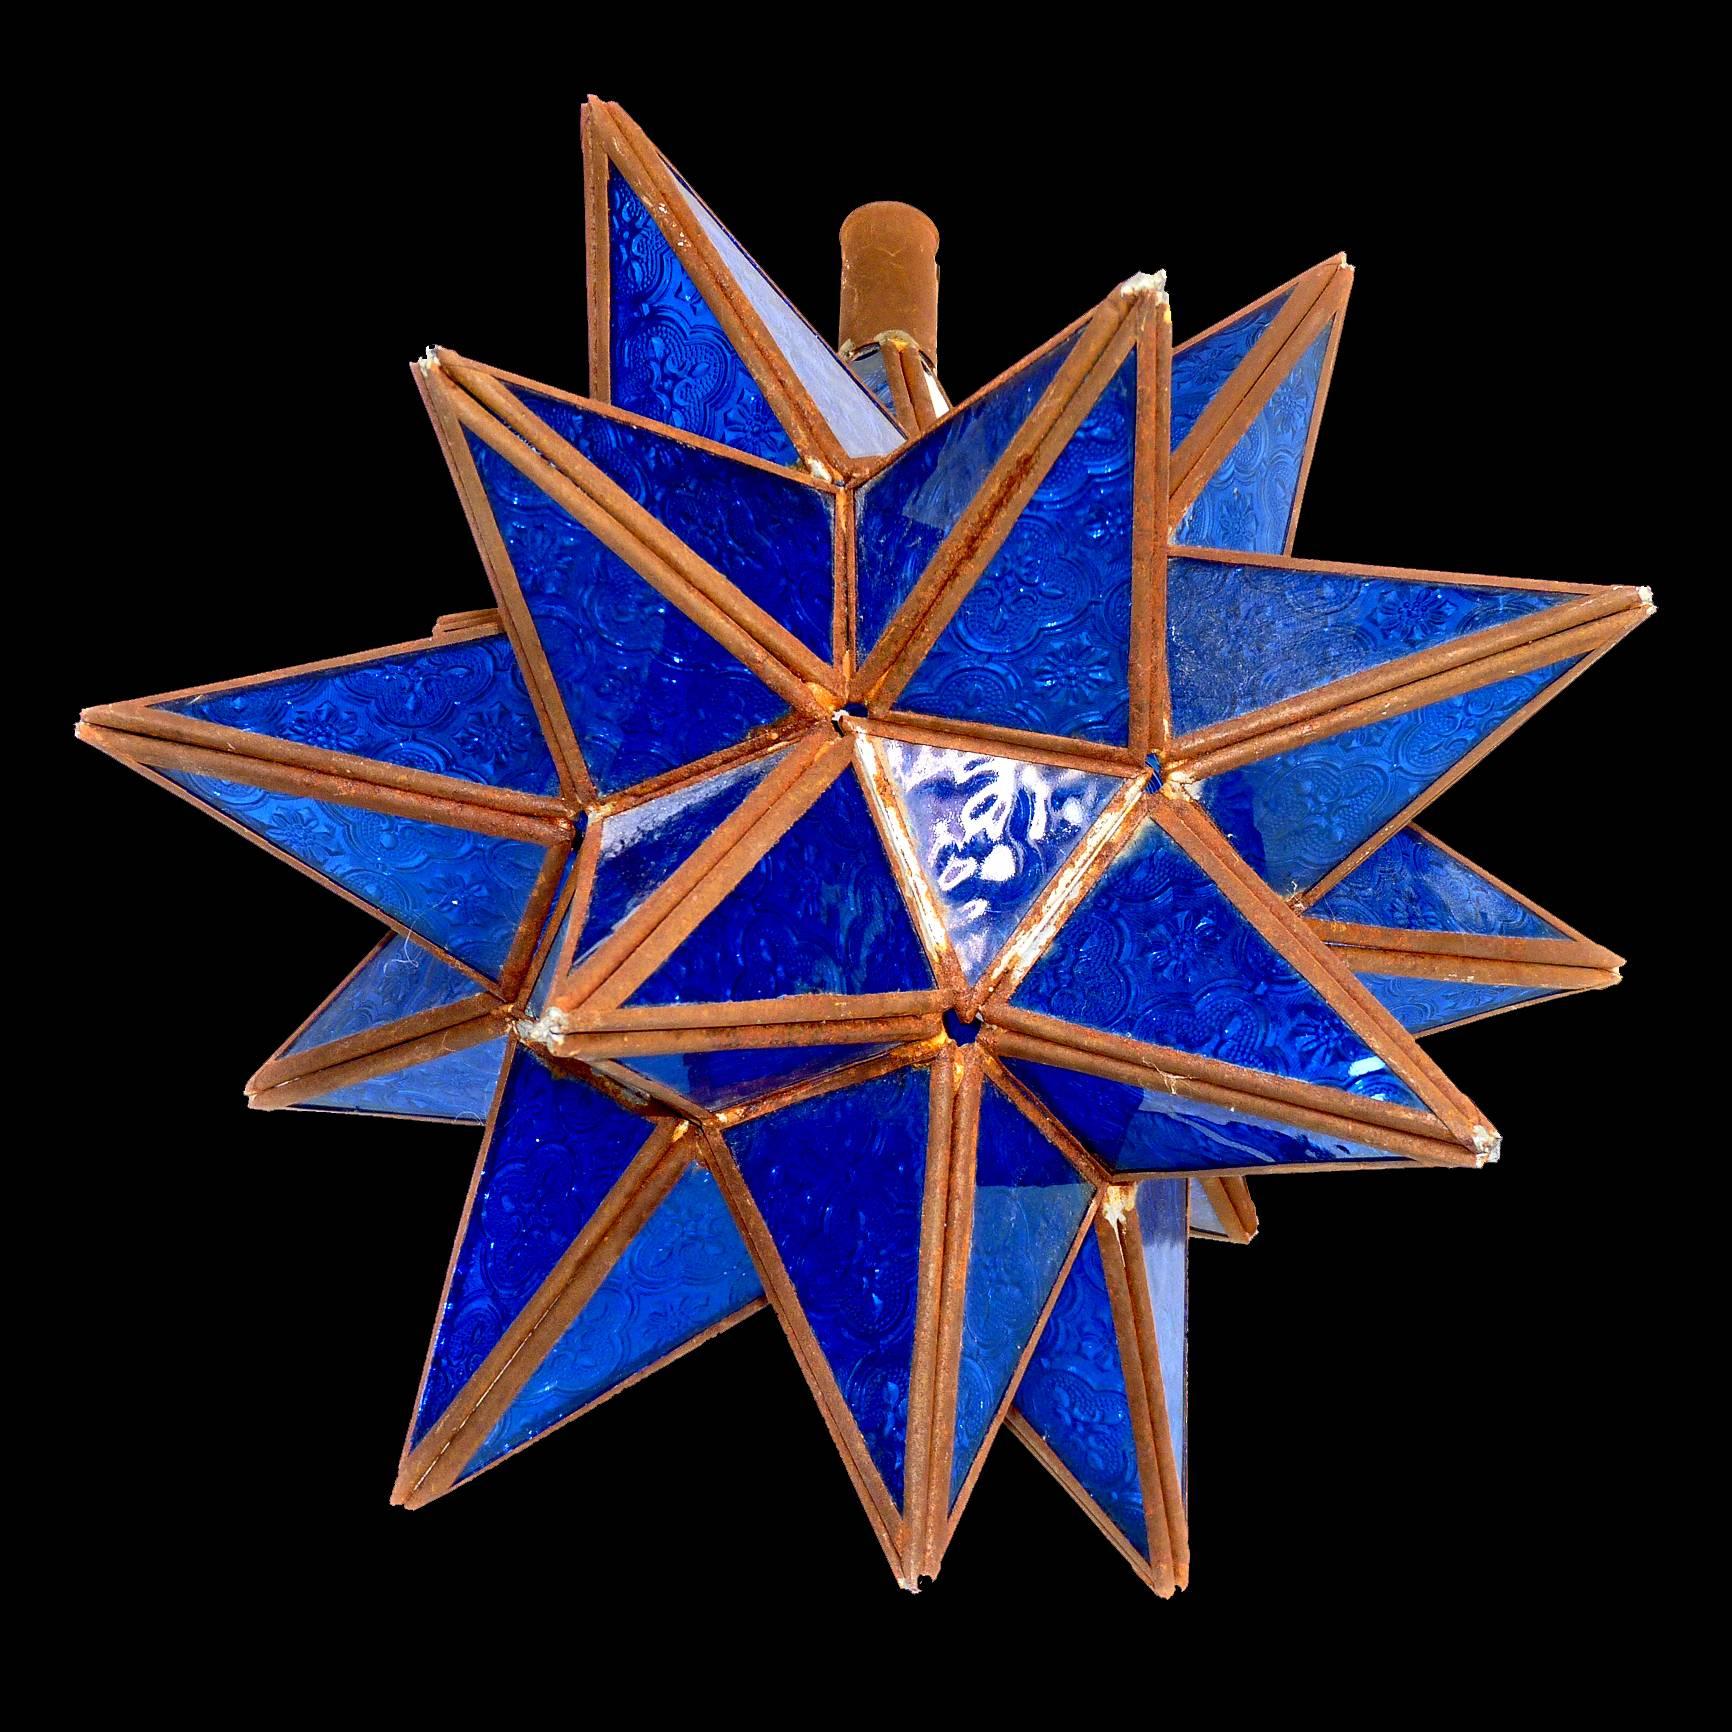 Antique handcrafted Tunisian deep blue glass pendant star shape ceiling lamp or light
unwired
Materials: Handcrafted cut-glass, handcrafted metal
Conditions: Wear consistent with age/Age patina/metal showing some rust.